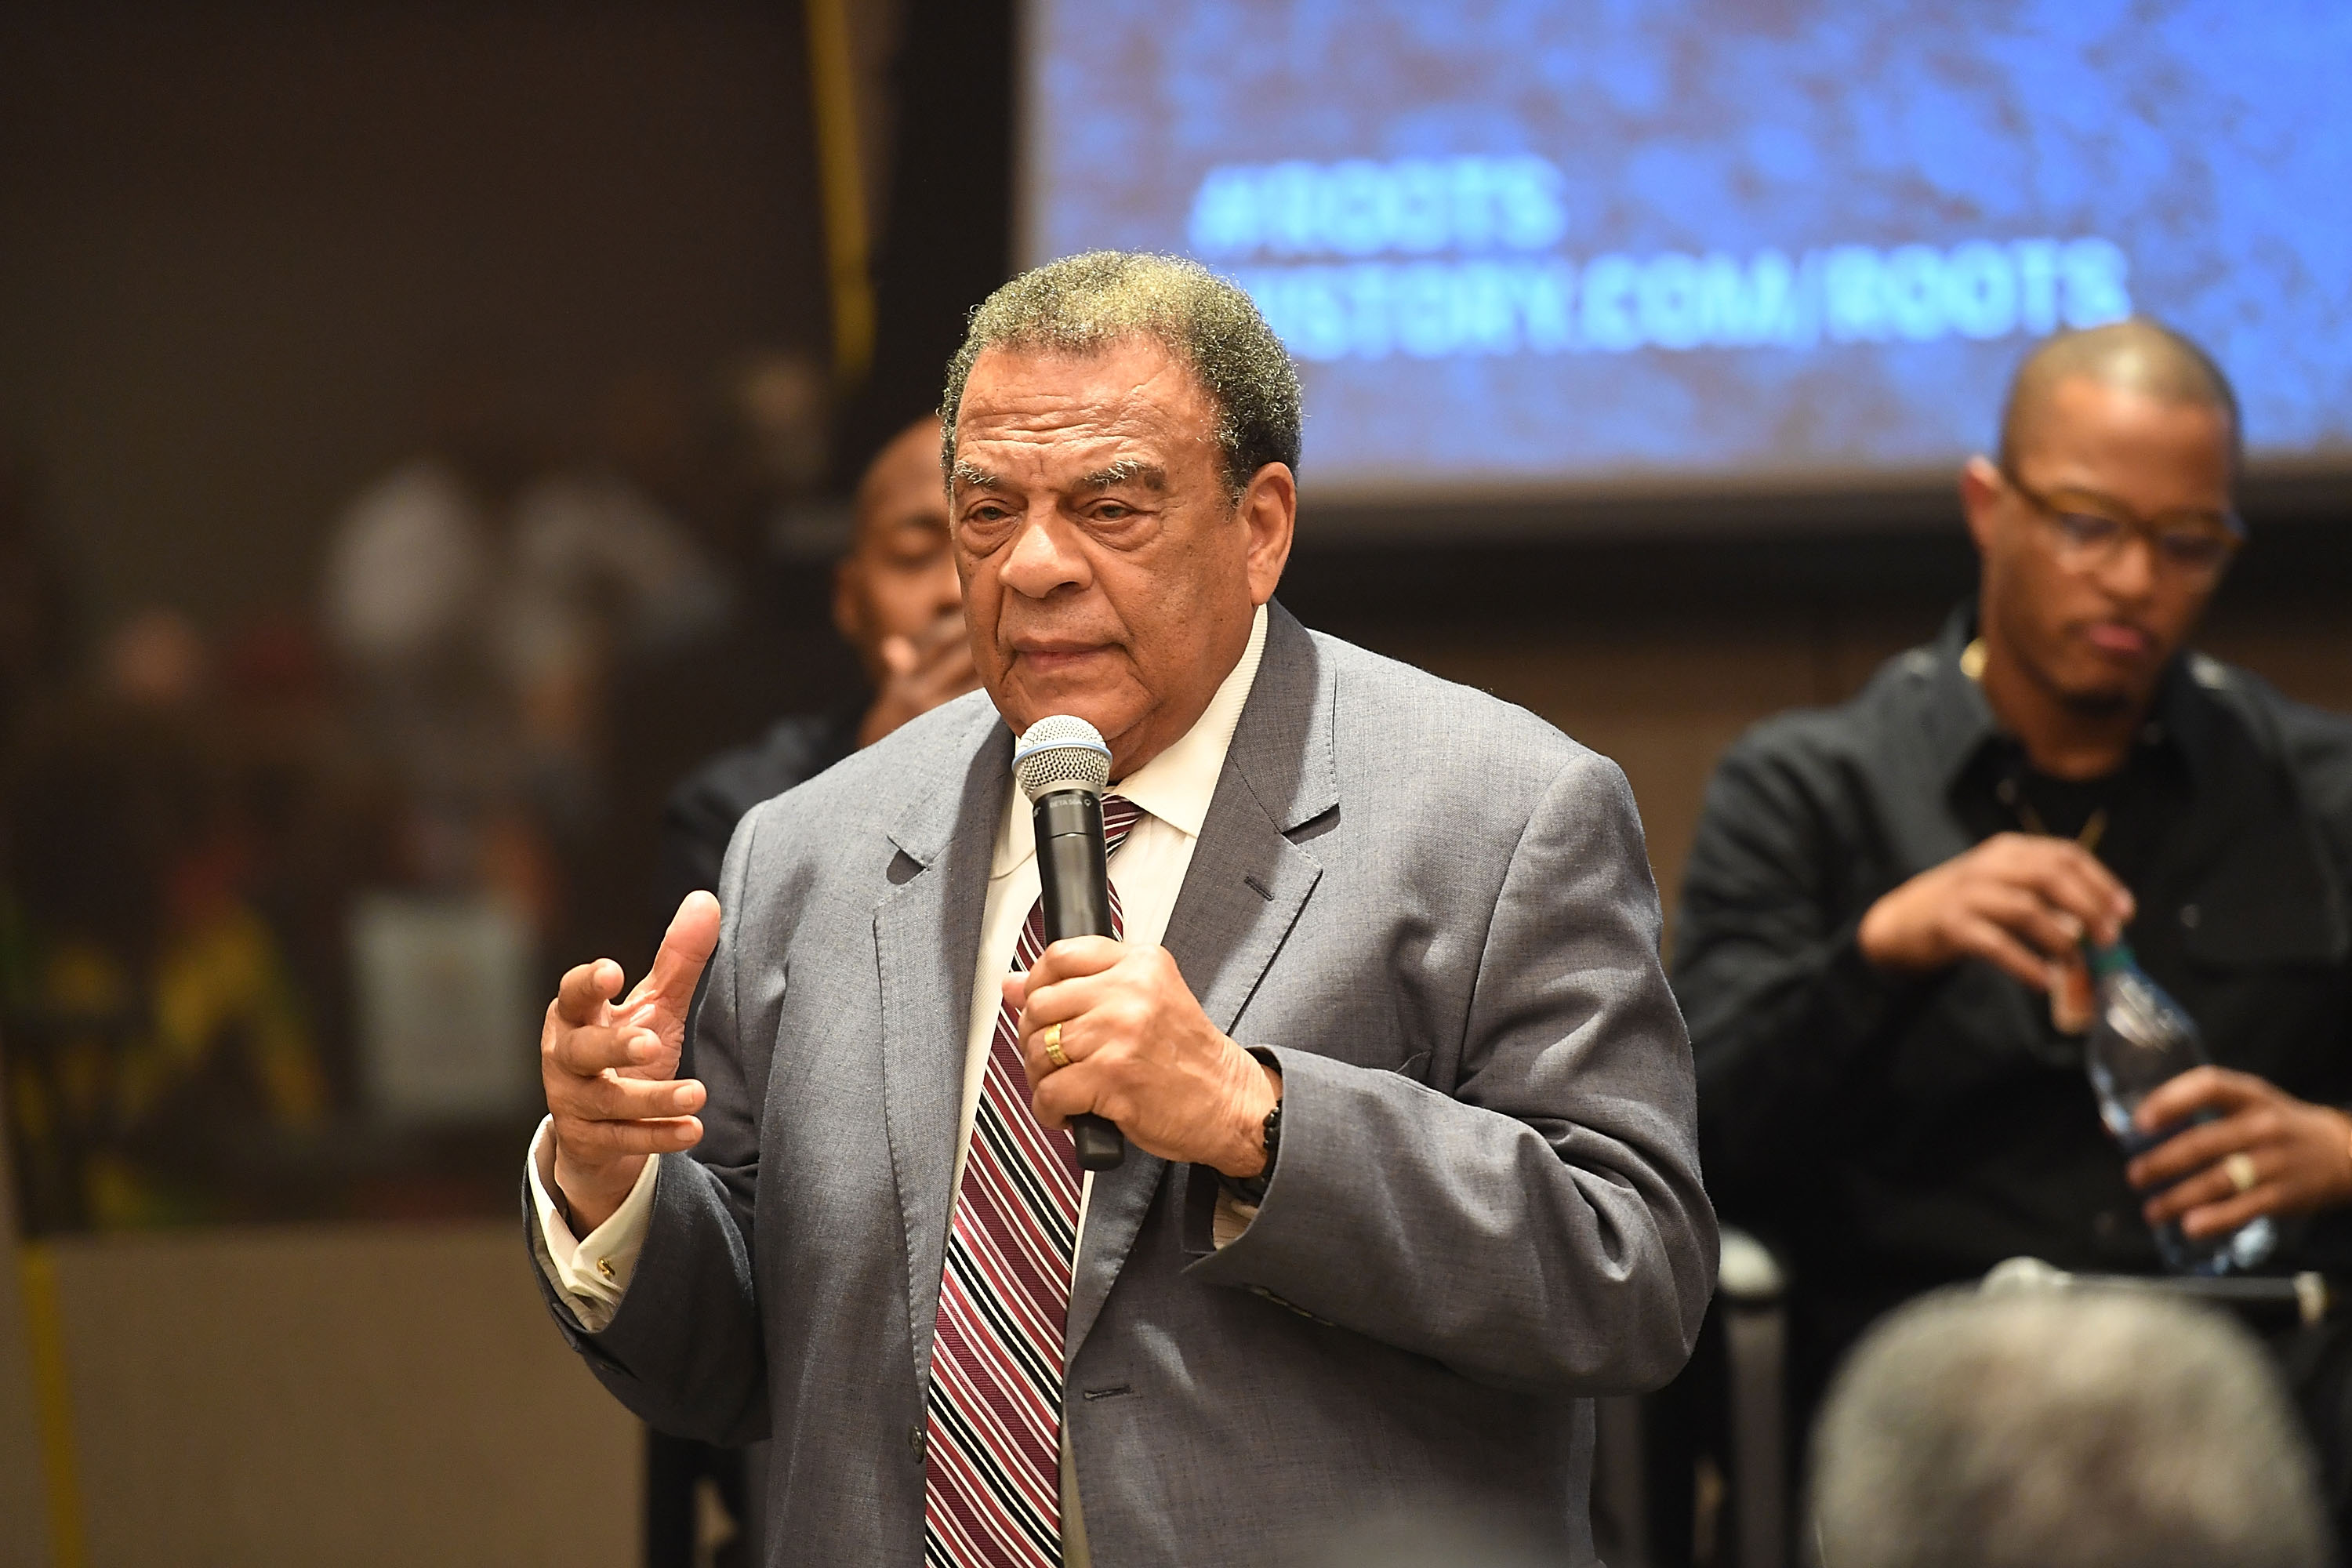 "ATLANTA, GA - MAY 09: Andrew Young speaks onstage at HISTORY's "Roots" Atlanta advanced screening at National Center for Civil and Human Rights on May 9, 2016 in Atlanta, Georgia. (Photo by Paras Griffin/Getty Images for History/Roots)"